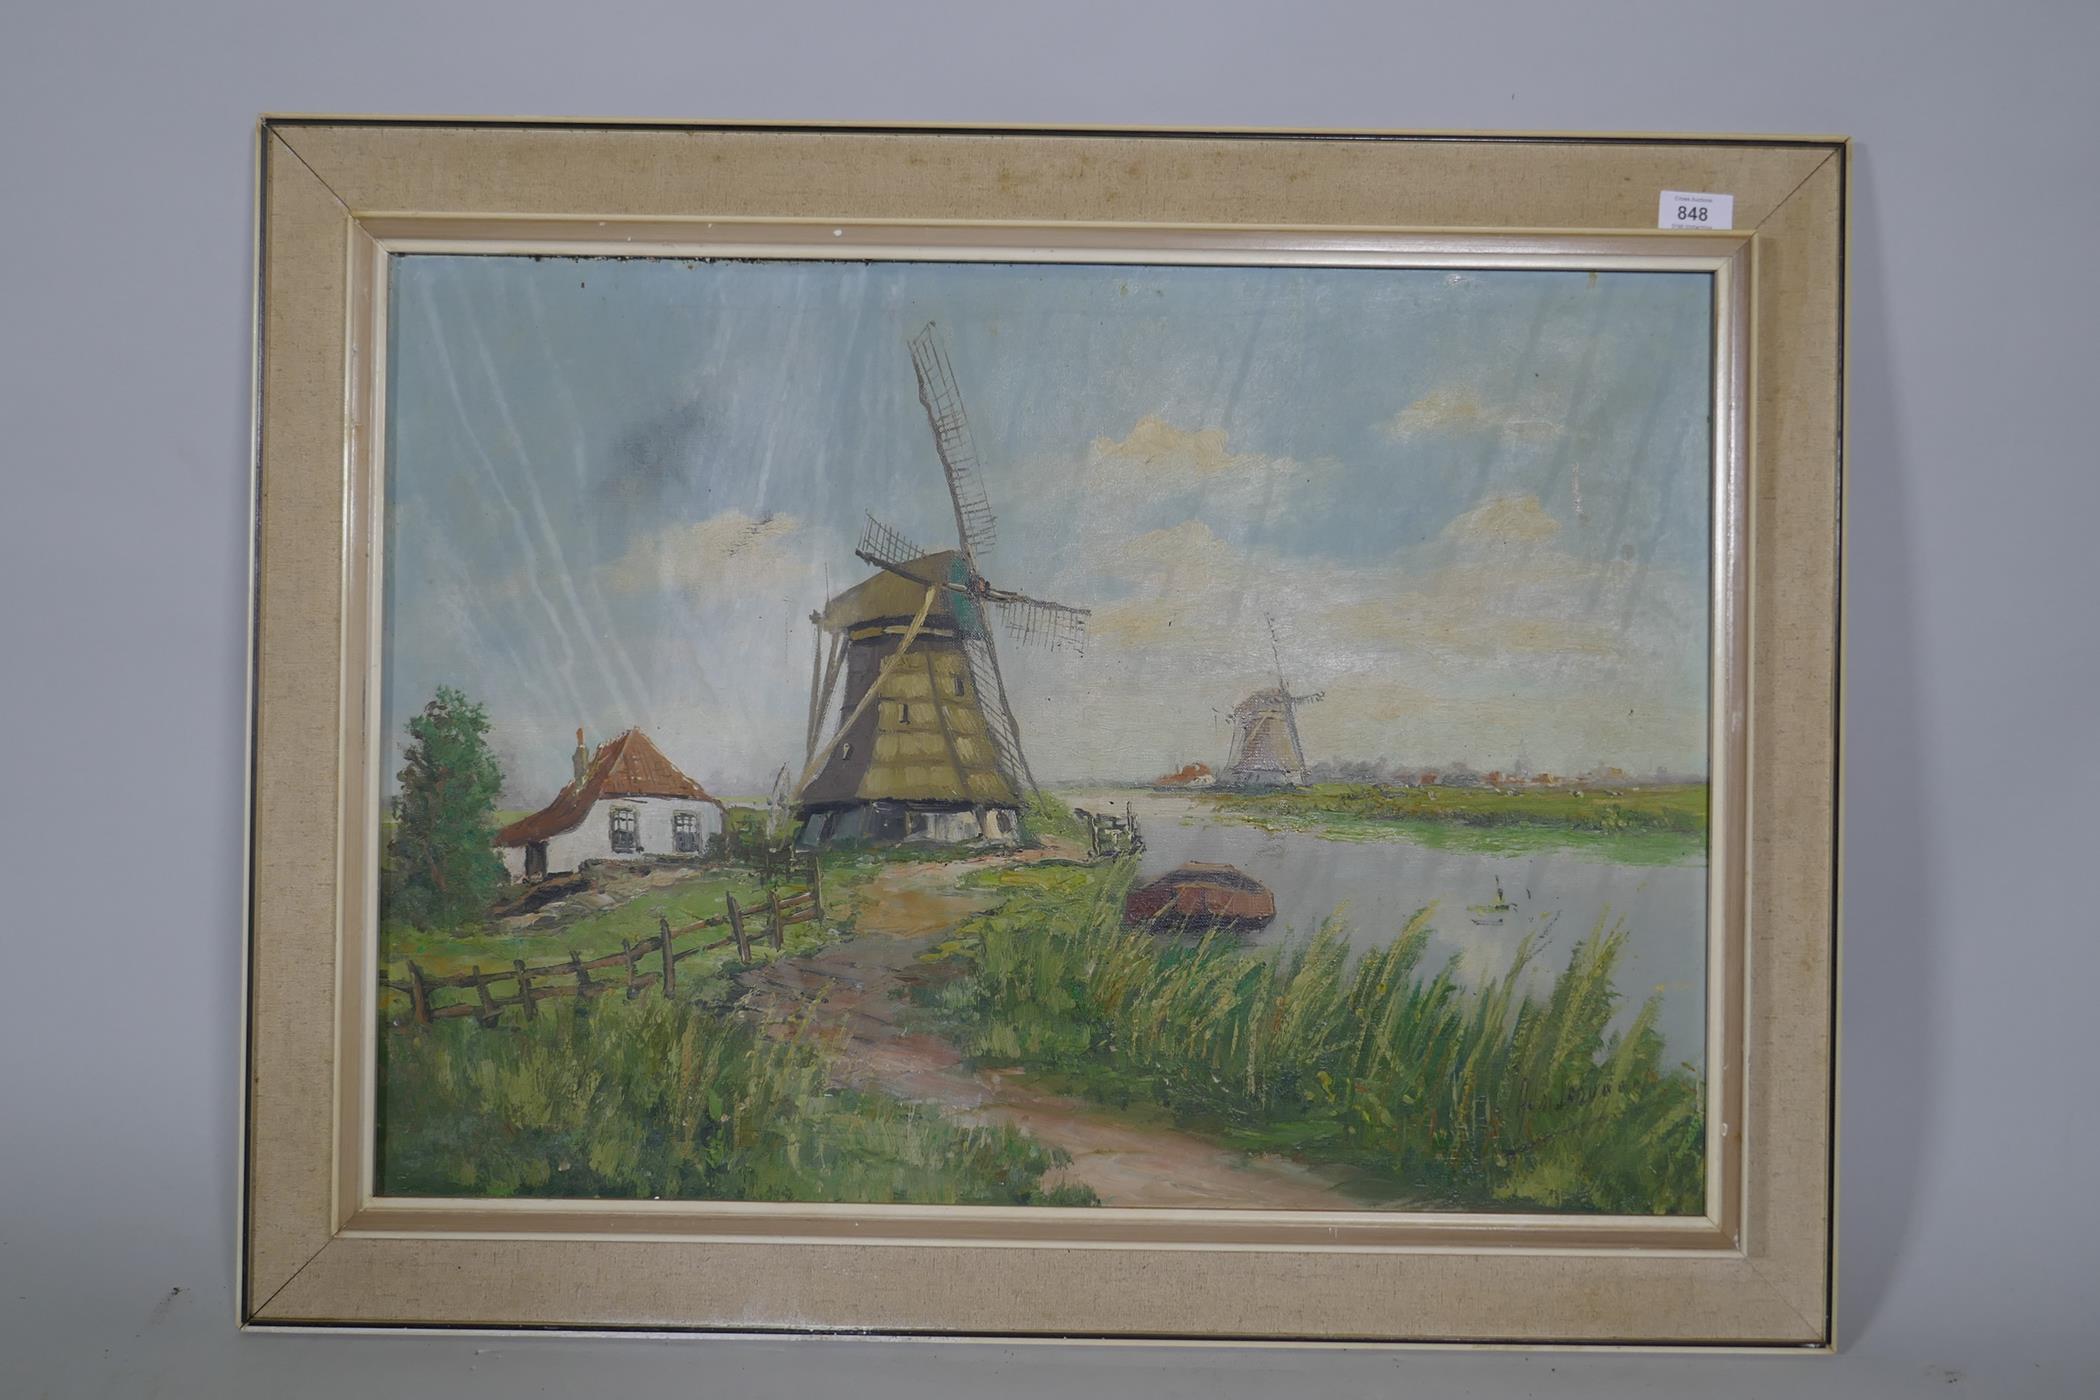 Dutch School, canal scene with windmills, signed, mid C20th, oil on canvas, 70 x 50cm - Image 2 of 5